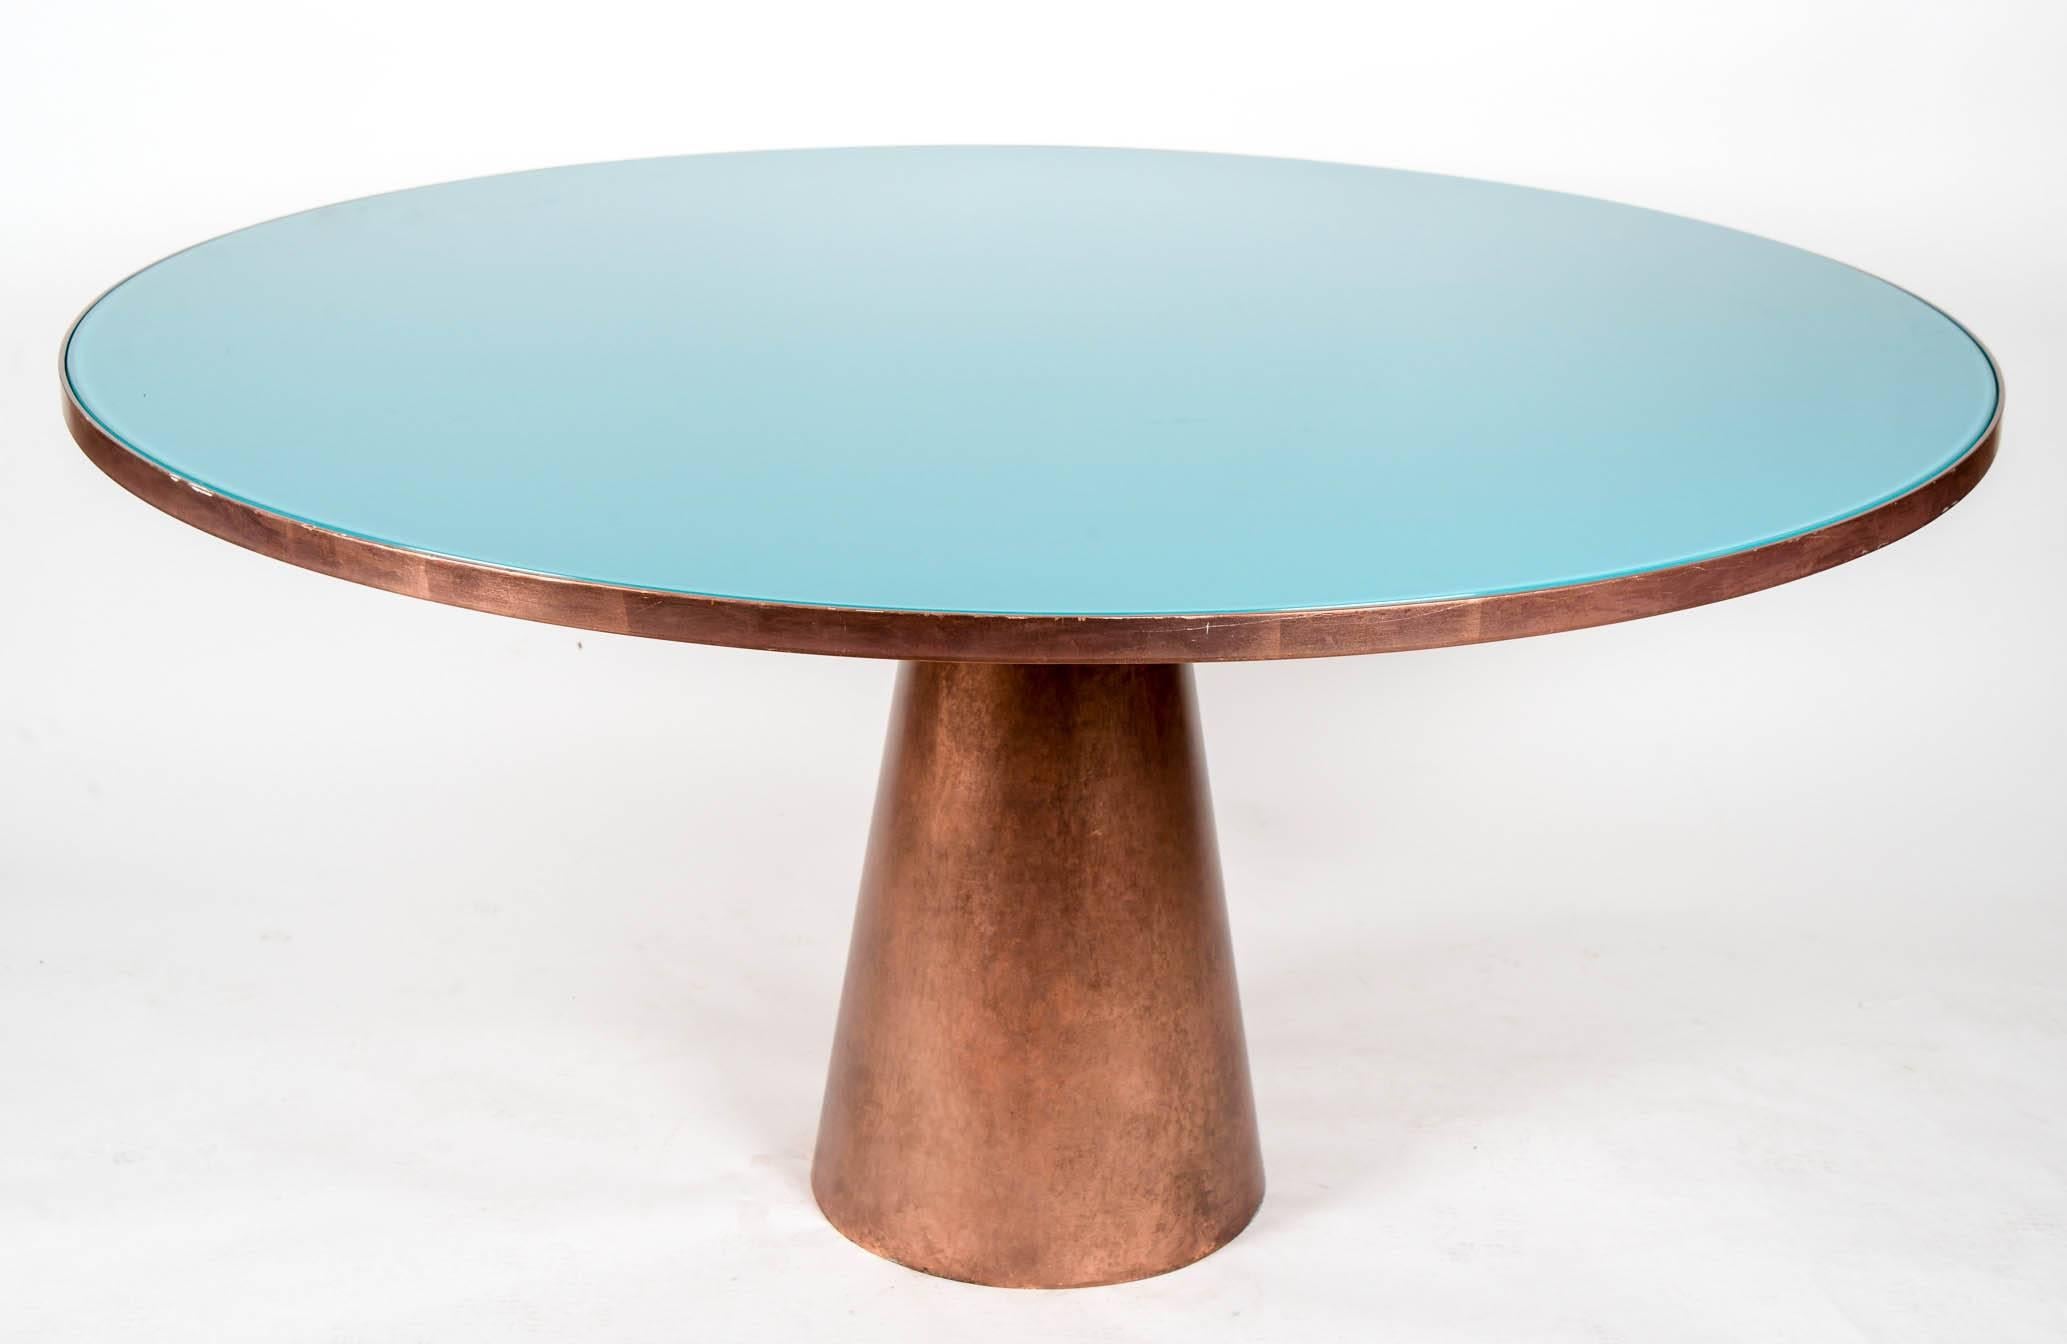 Modern Round table at cost price.